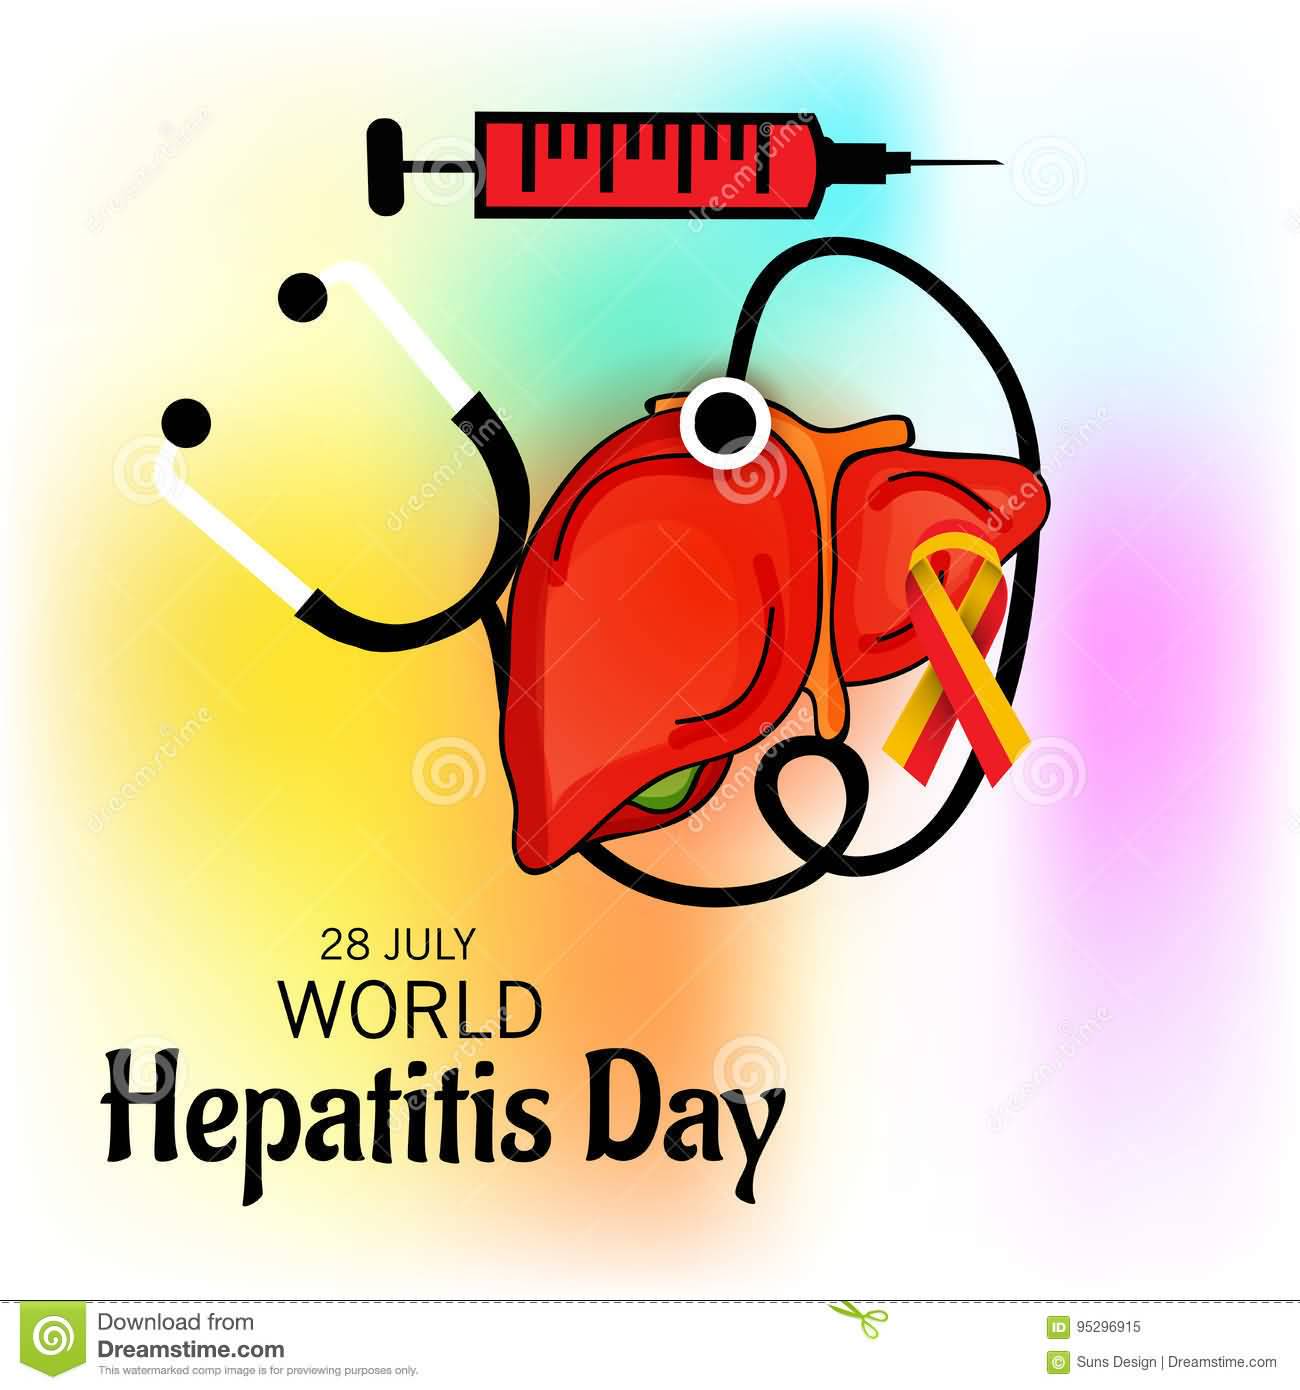 28 July World Hepatitis DayLIver With Injection And Stethoscope Illustration